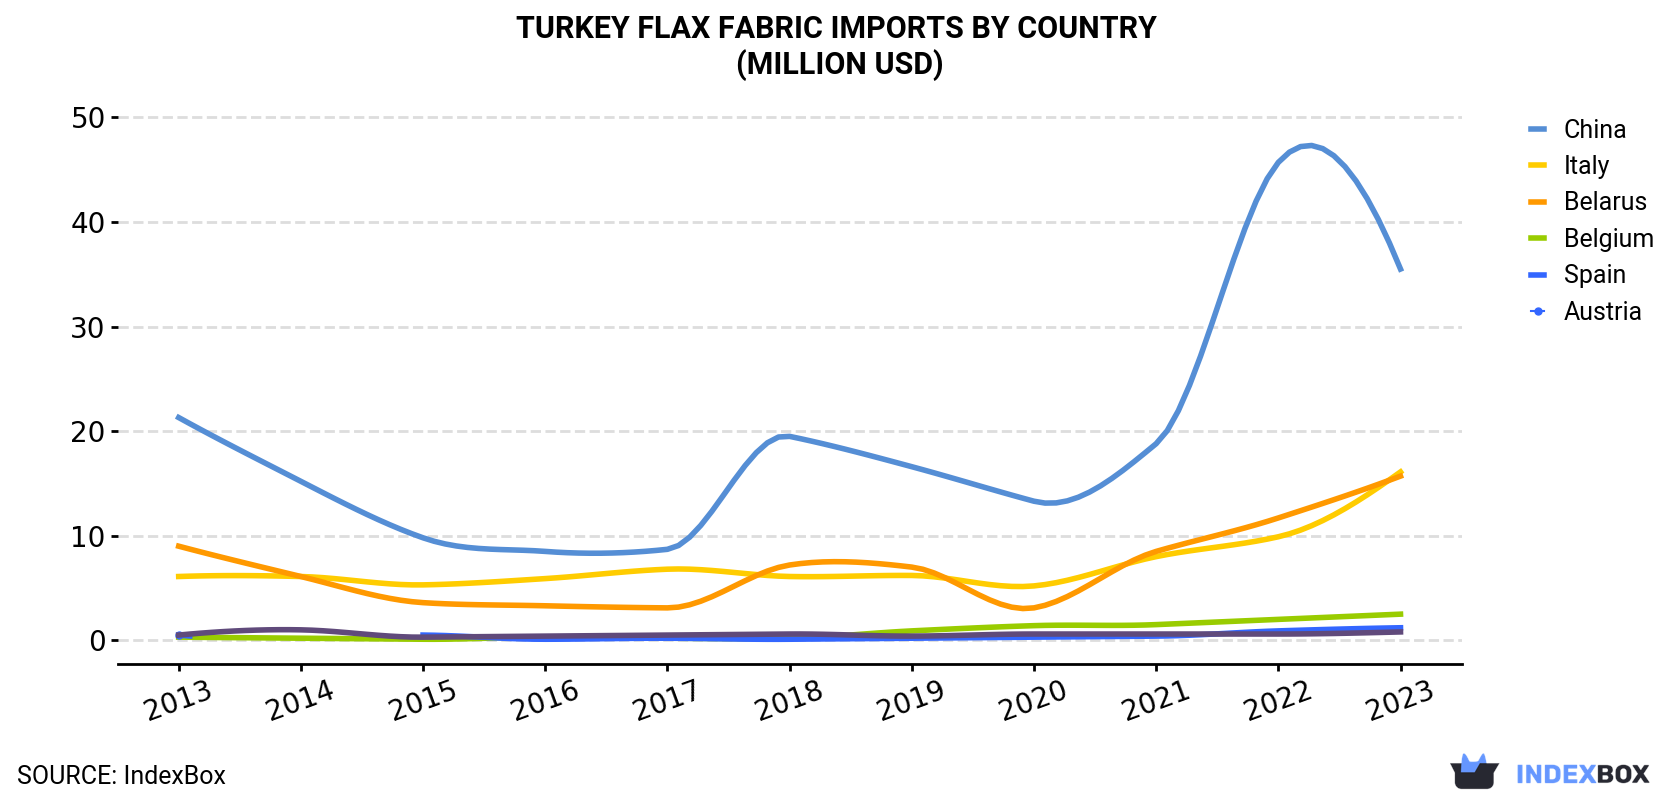 Turkey Flax Fabric Imports By Country (Million USD)